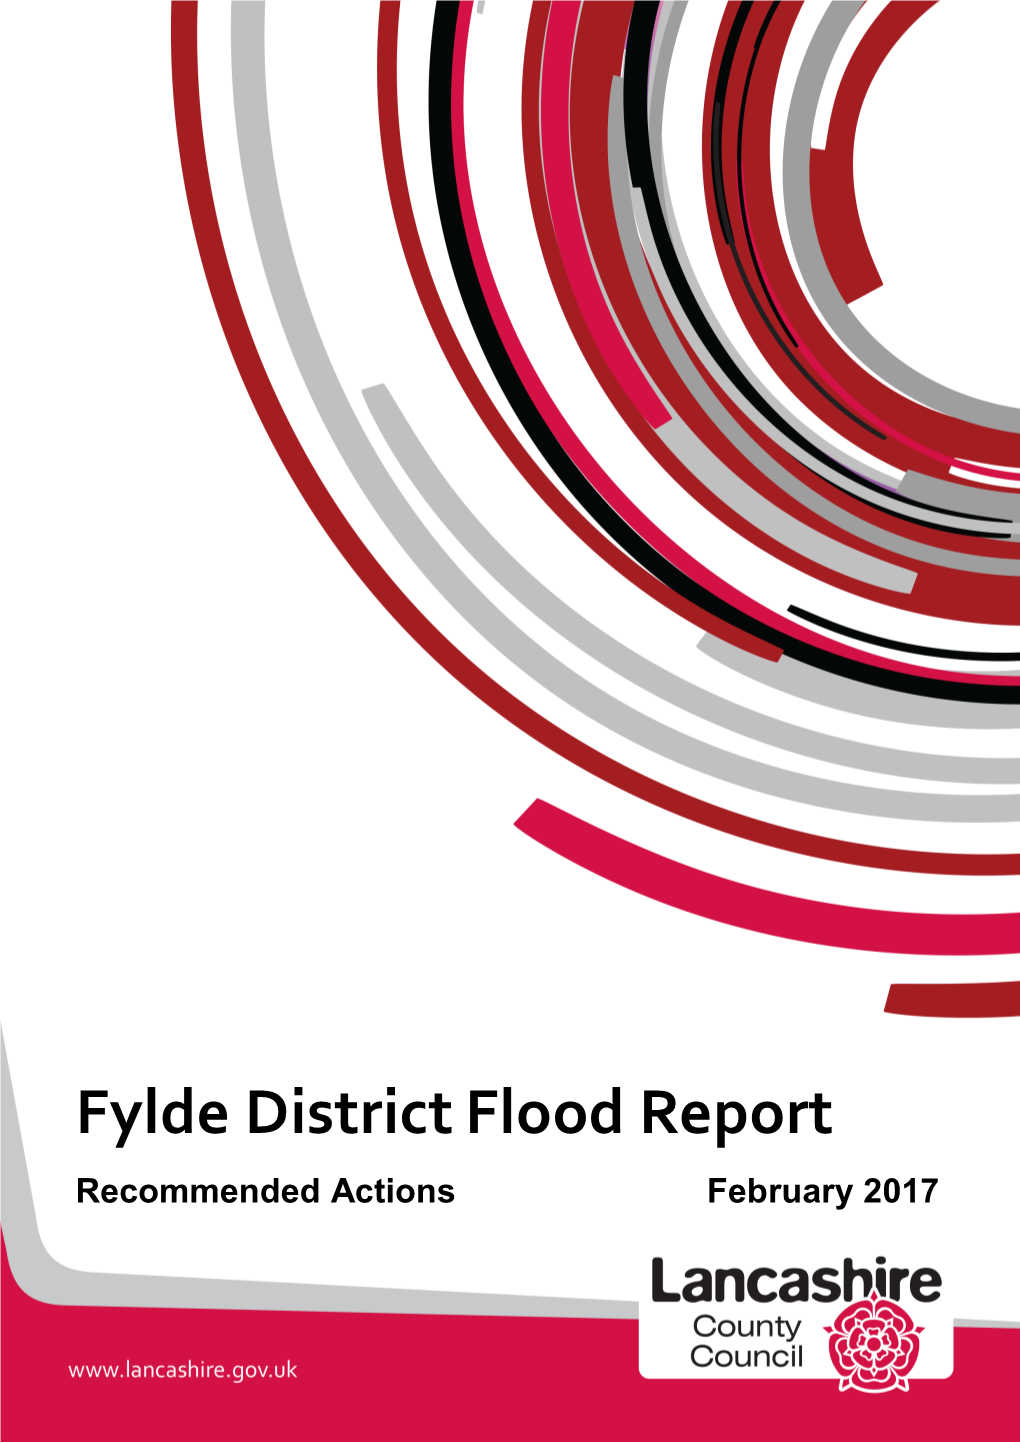 Fylde District Flood Report Recommended Actions February 2017